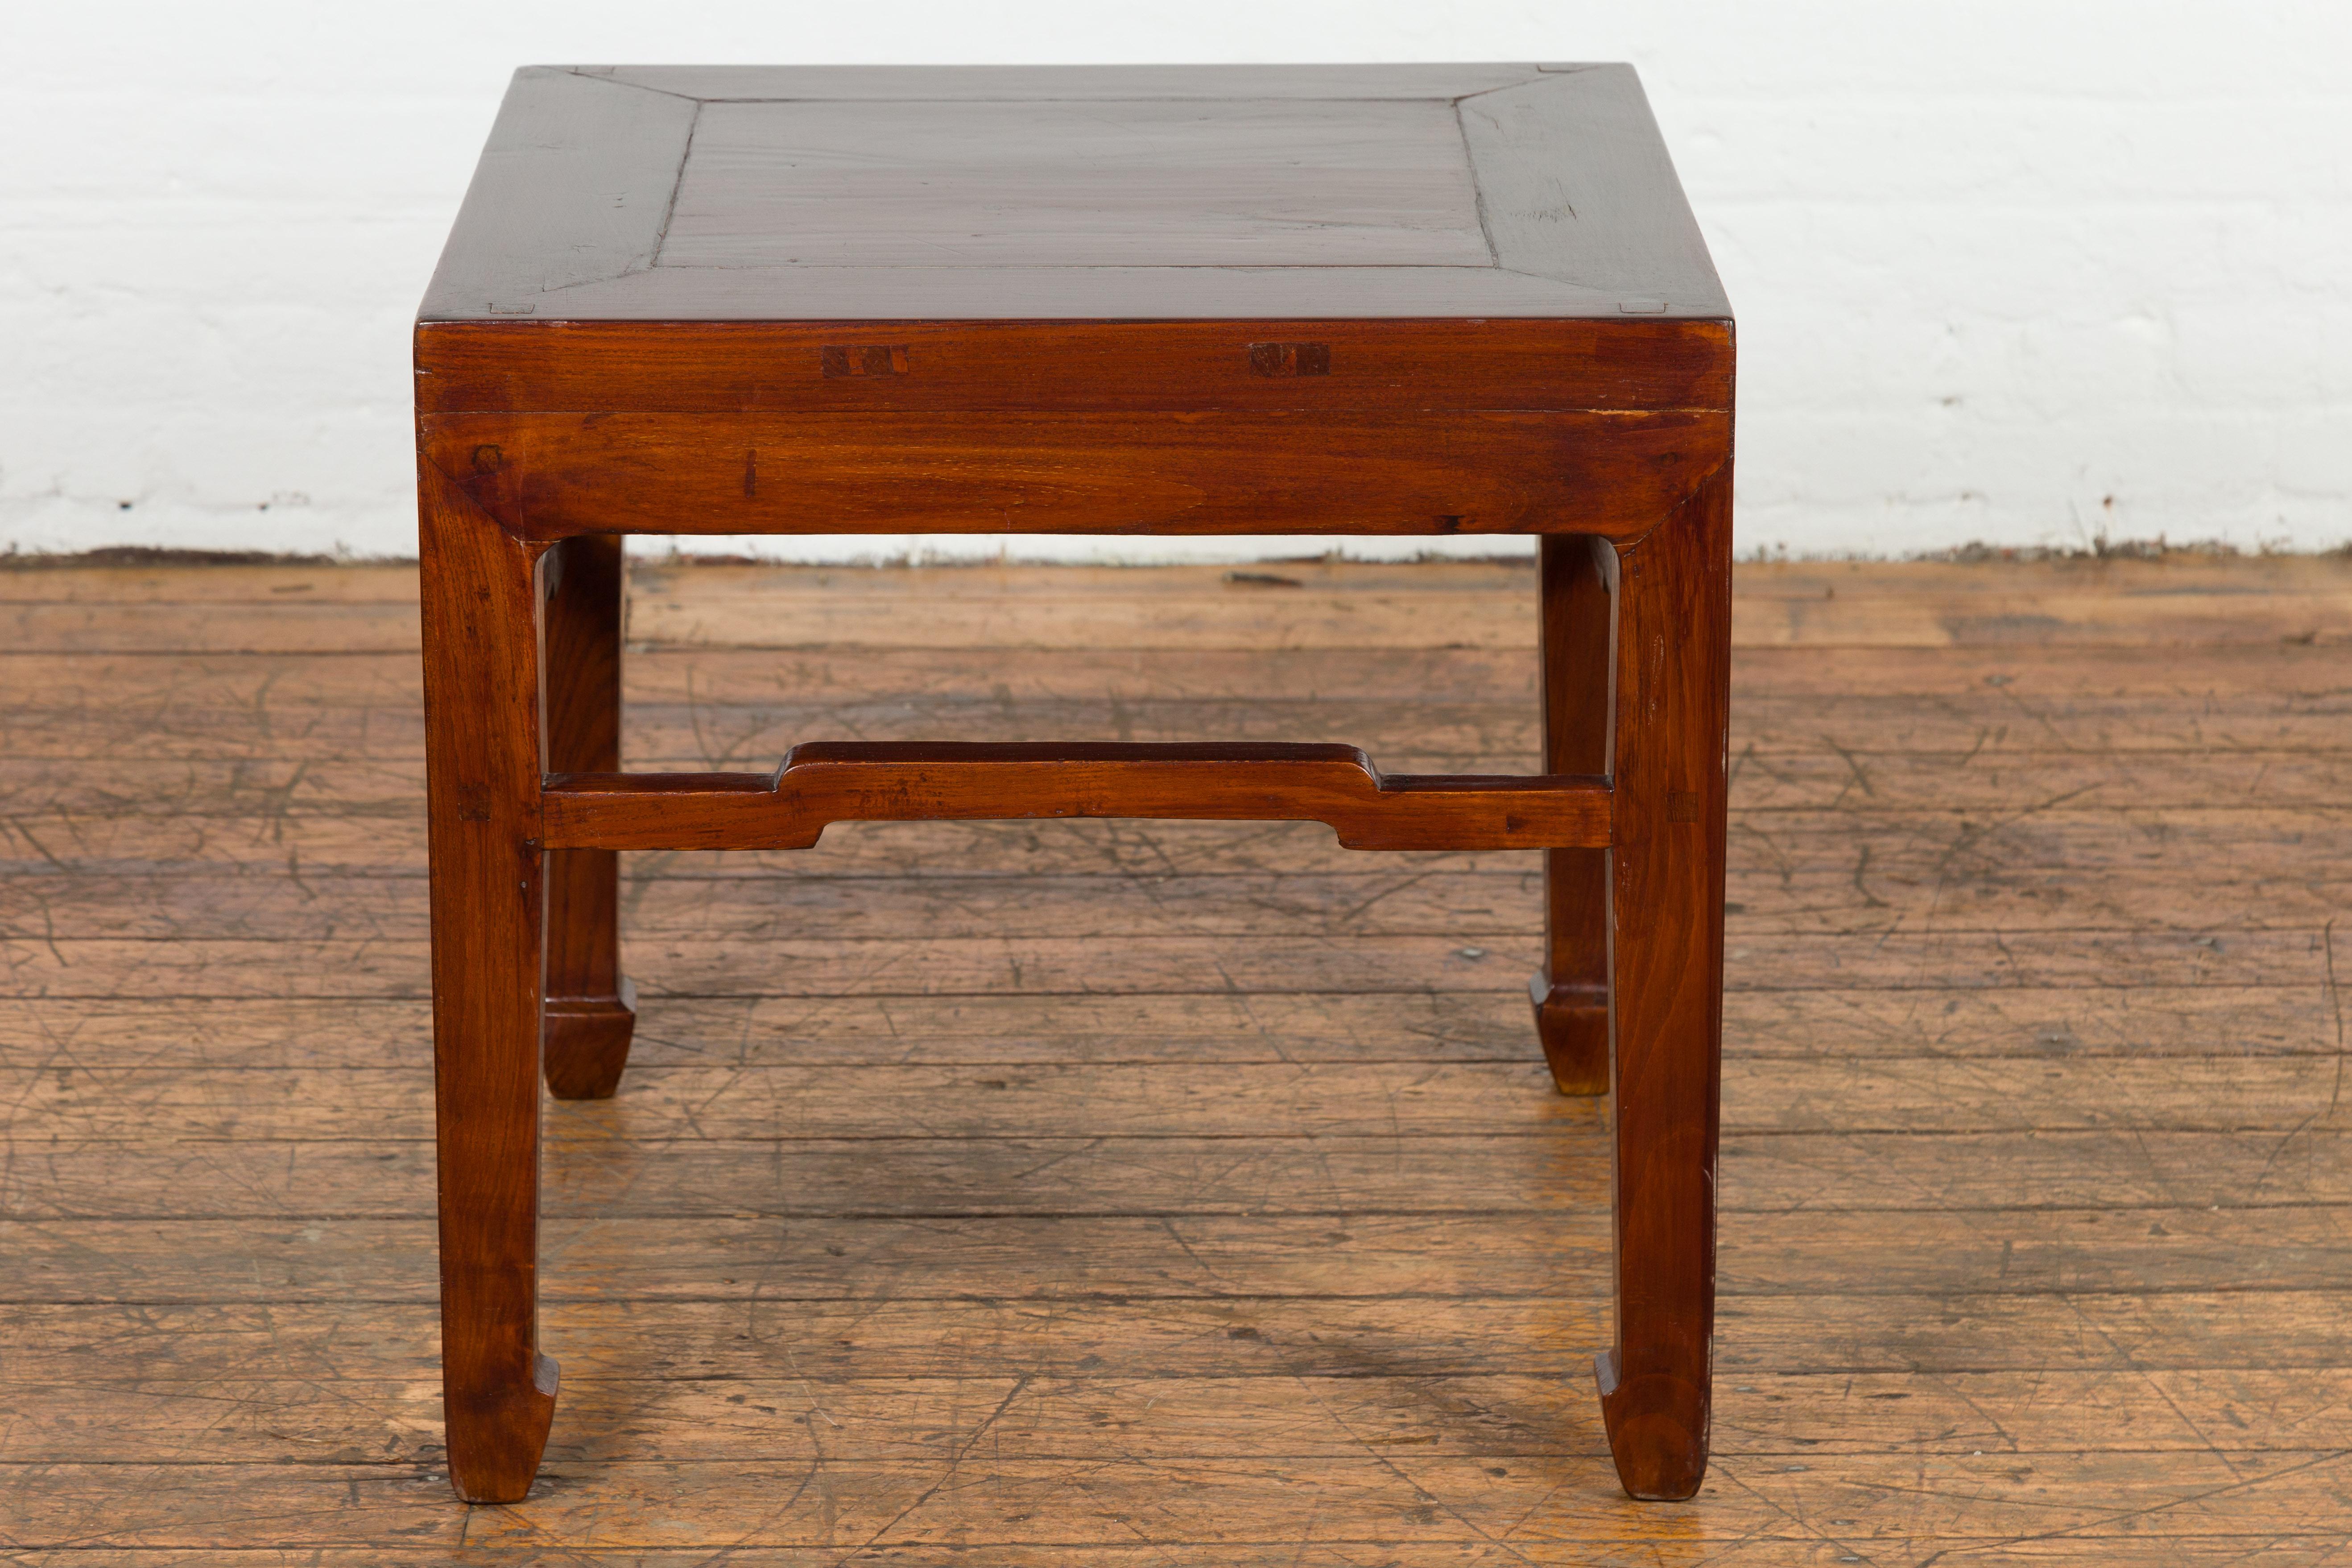 Chinese Qing Dynasty Period 19th Century Side Table with Humpback Stretchers For Sale 10